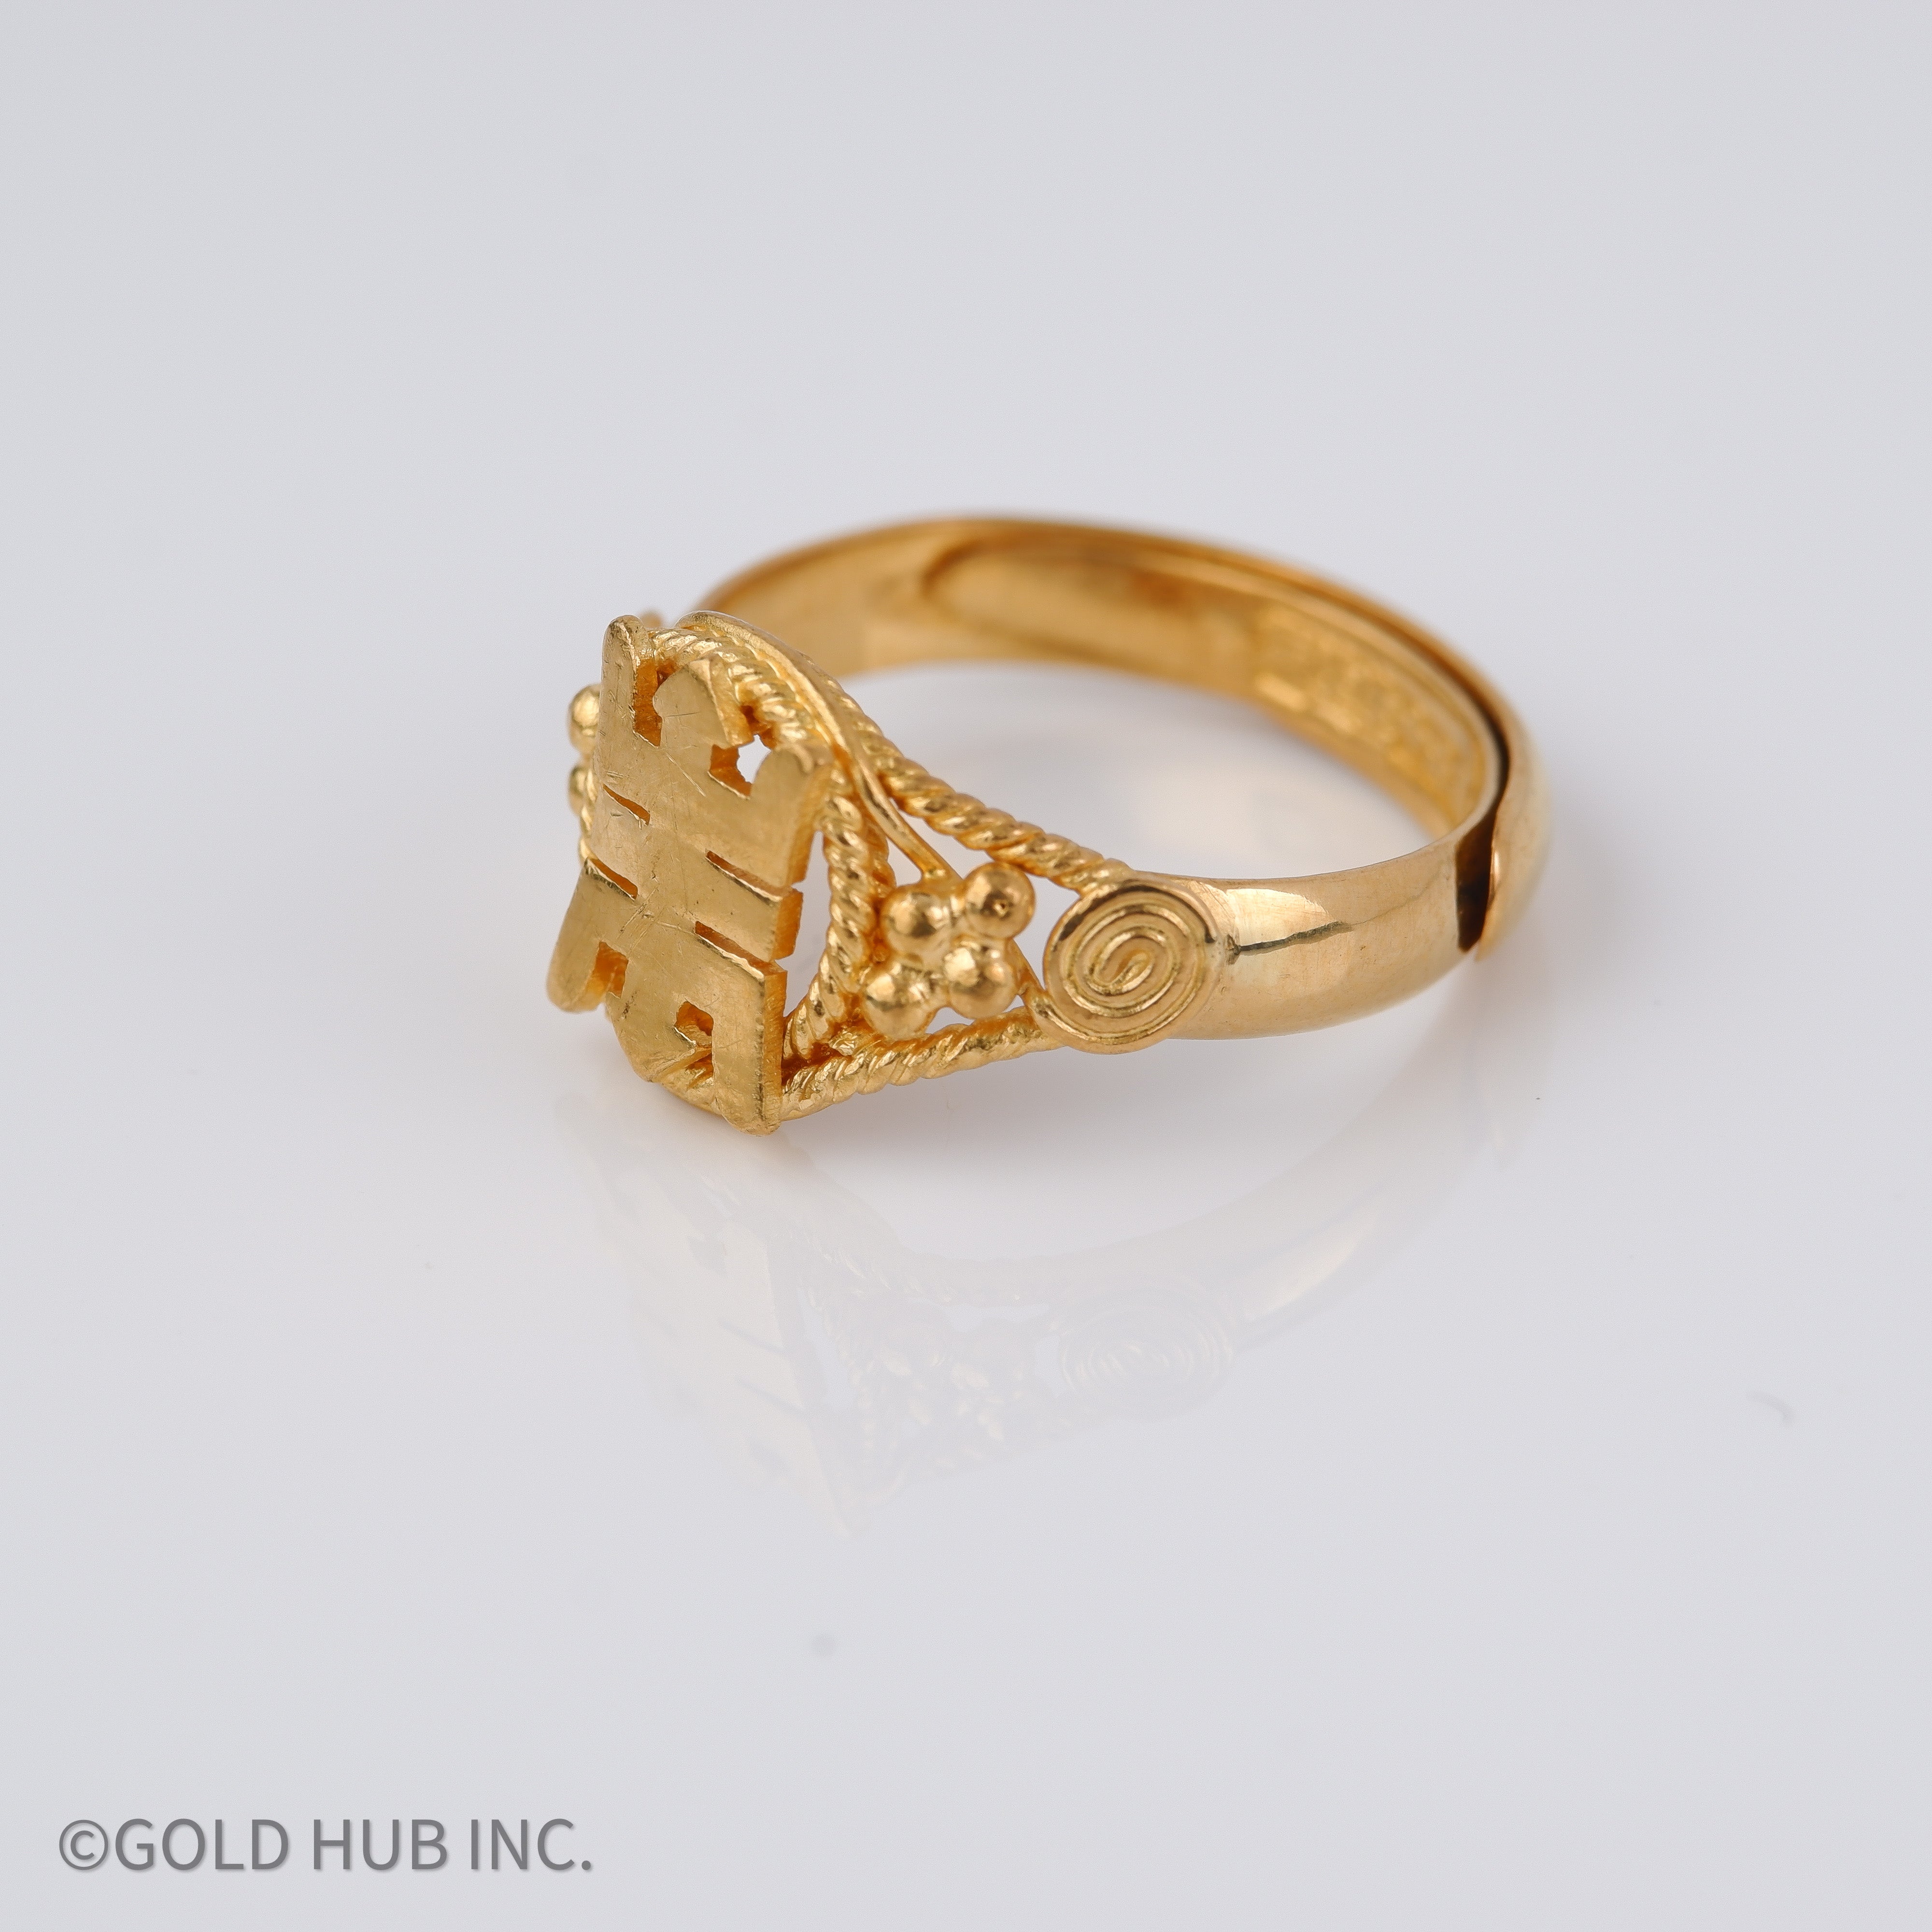 Buy GOWE 24k Pure Gold Ring for Women Beautiful Lines Exquisite Shape  Resizable Design Fresh and Creative Style Gold Rings at Amazon.in